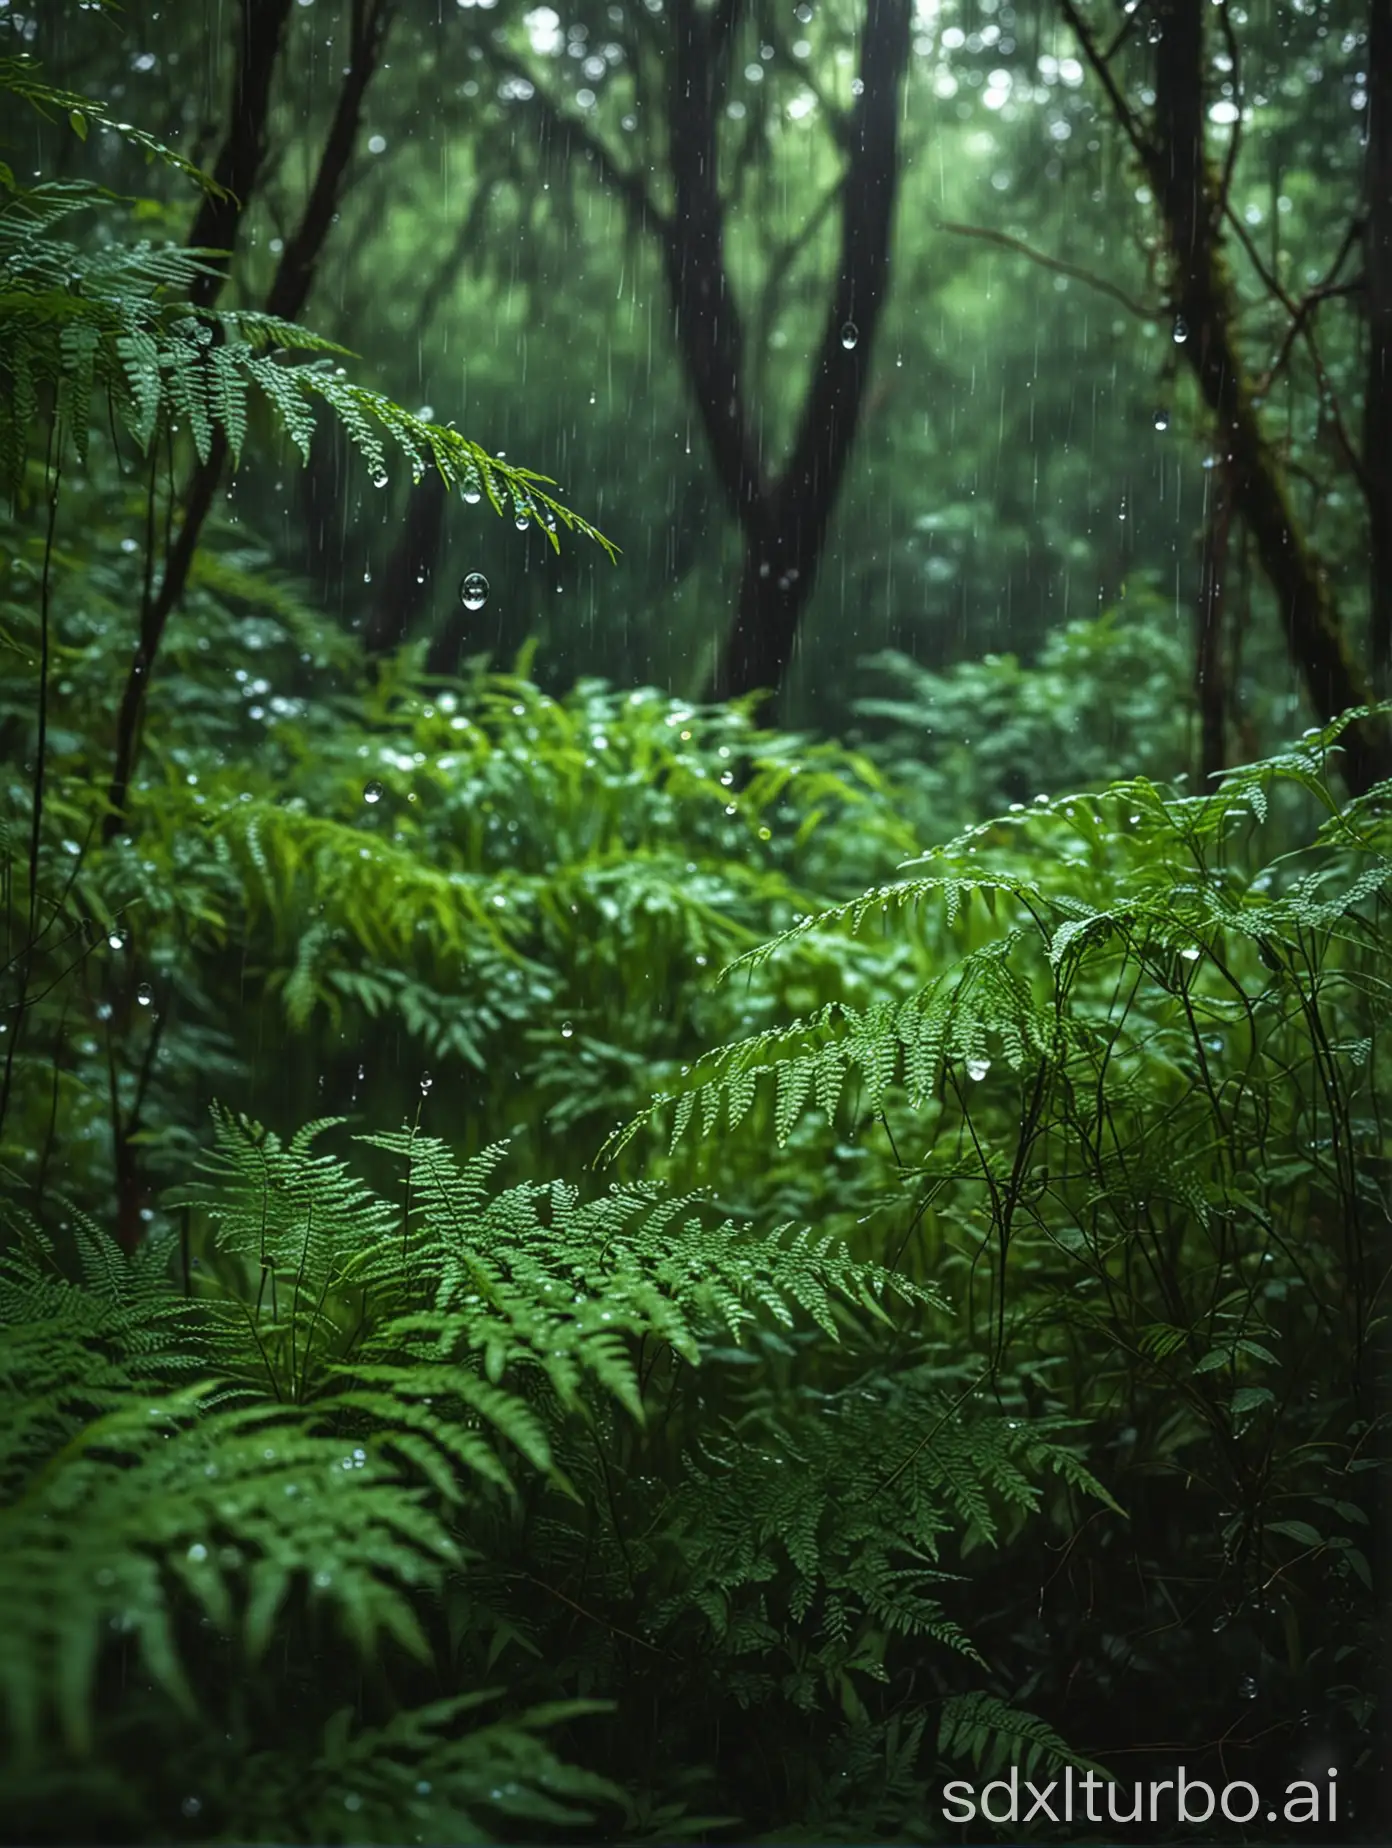 macro photography of heavy rain, dense forest in May, thick grass and ferns, raindrops falling, contemporary fairy tale, magic